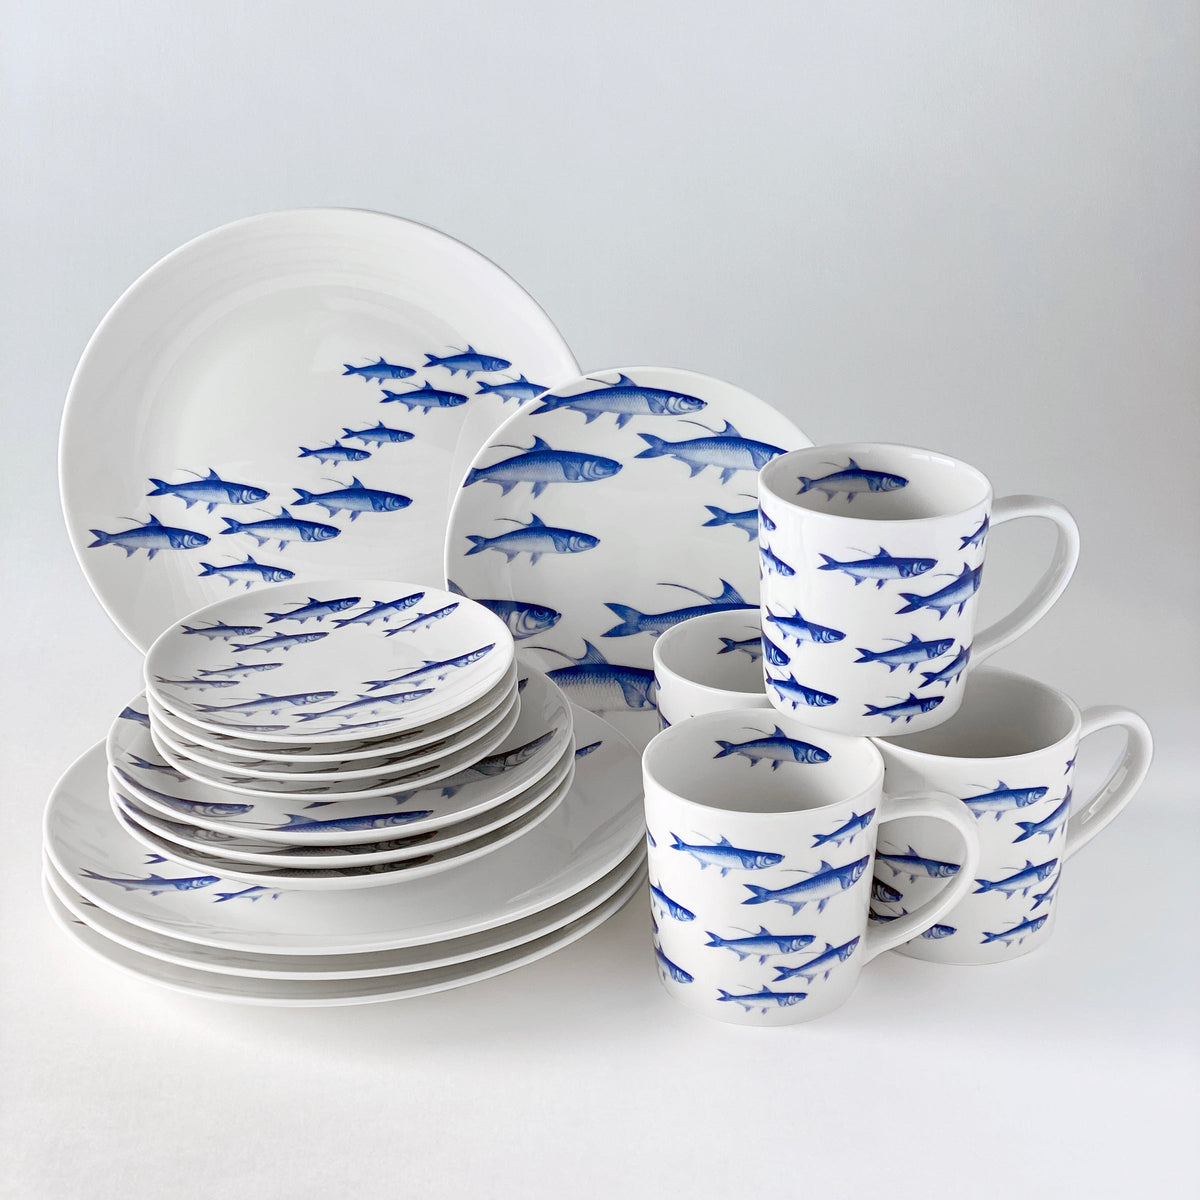 A **School of Fish Mug** in blue and white dinnerware set with sharks on it by Caskata Artisanal Home.